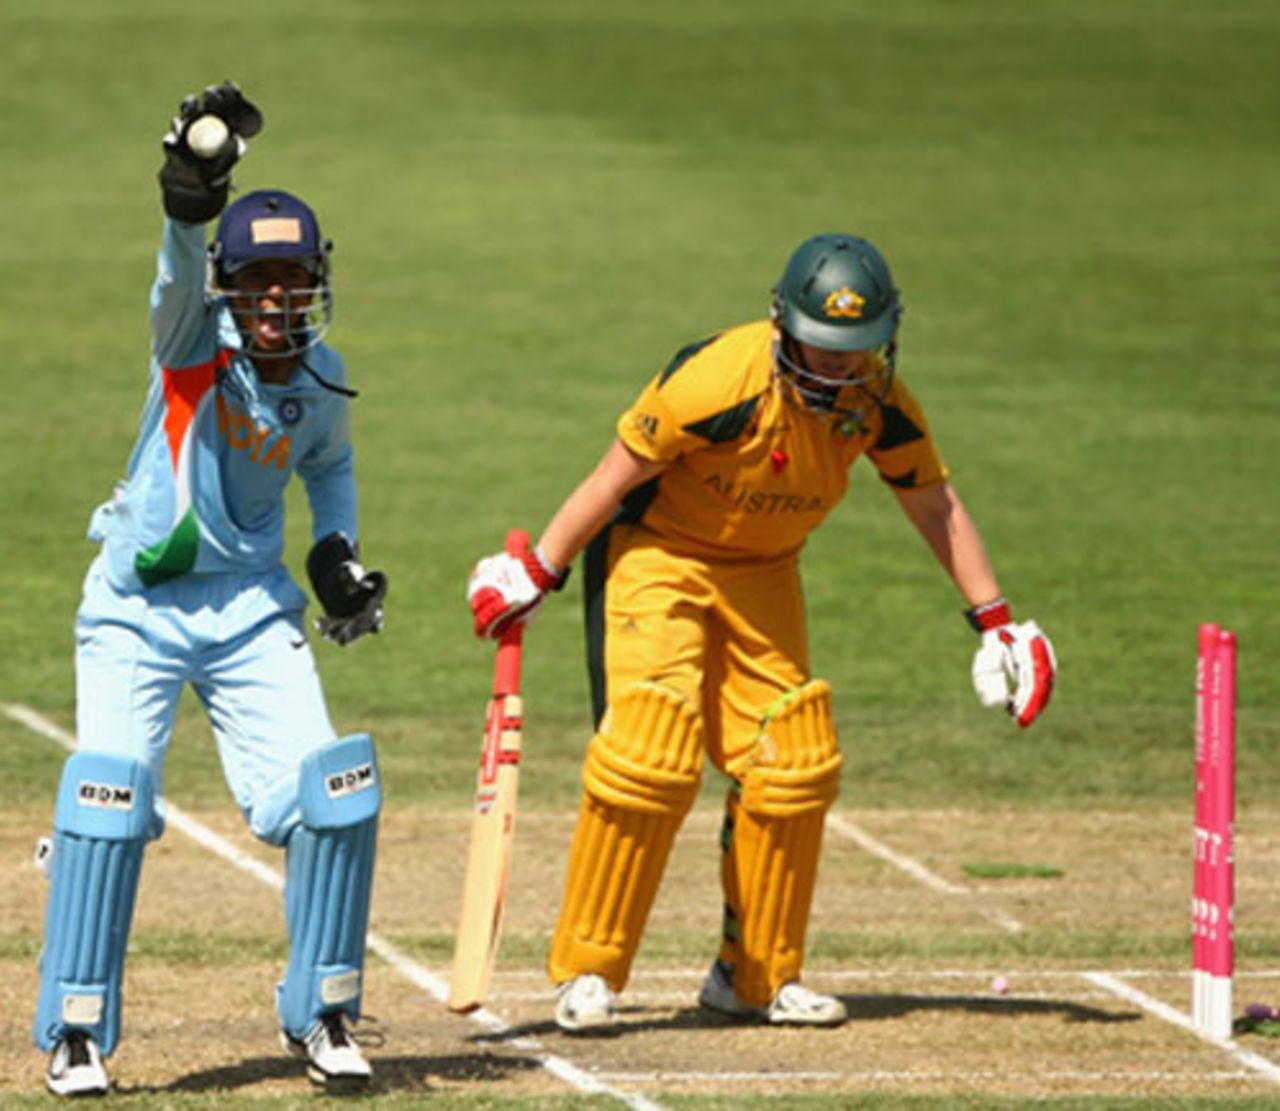 Anagha Deshpande appeals successfully for a stumping against Karen Rolton, Australia v India, Super Six, women's World Cup, Sydney, March 14, 2009